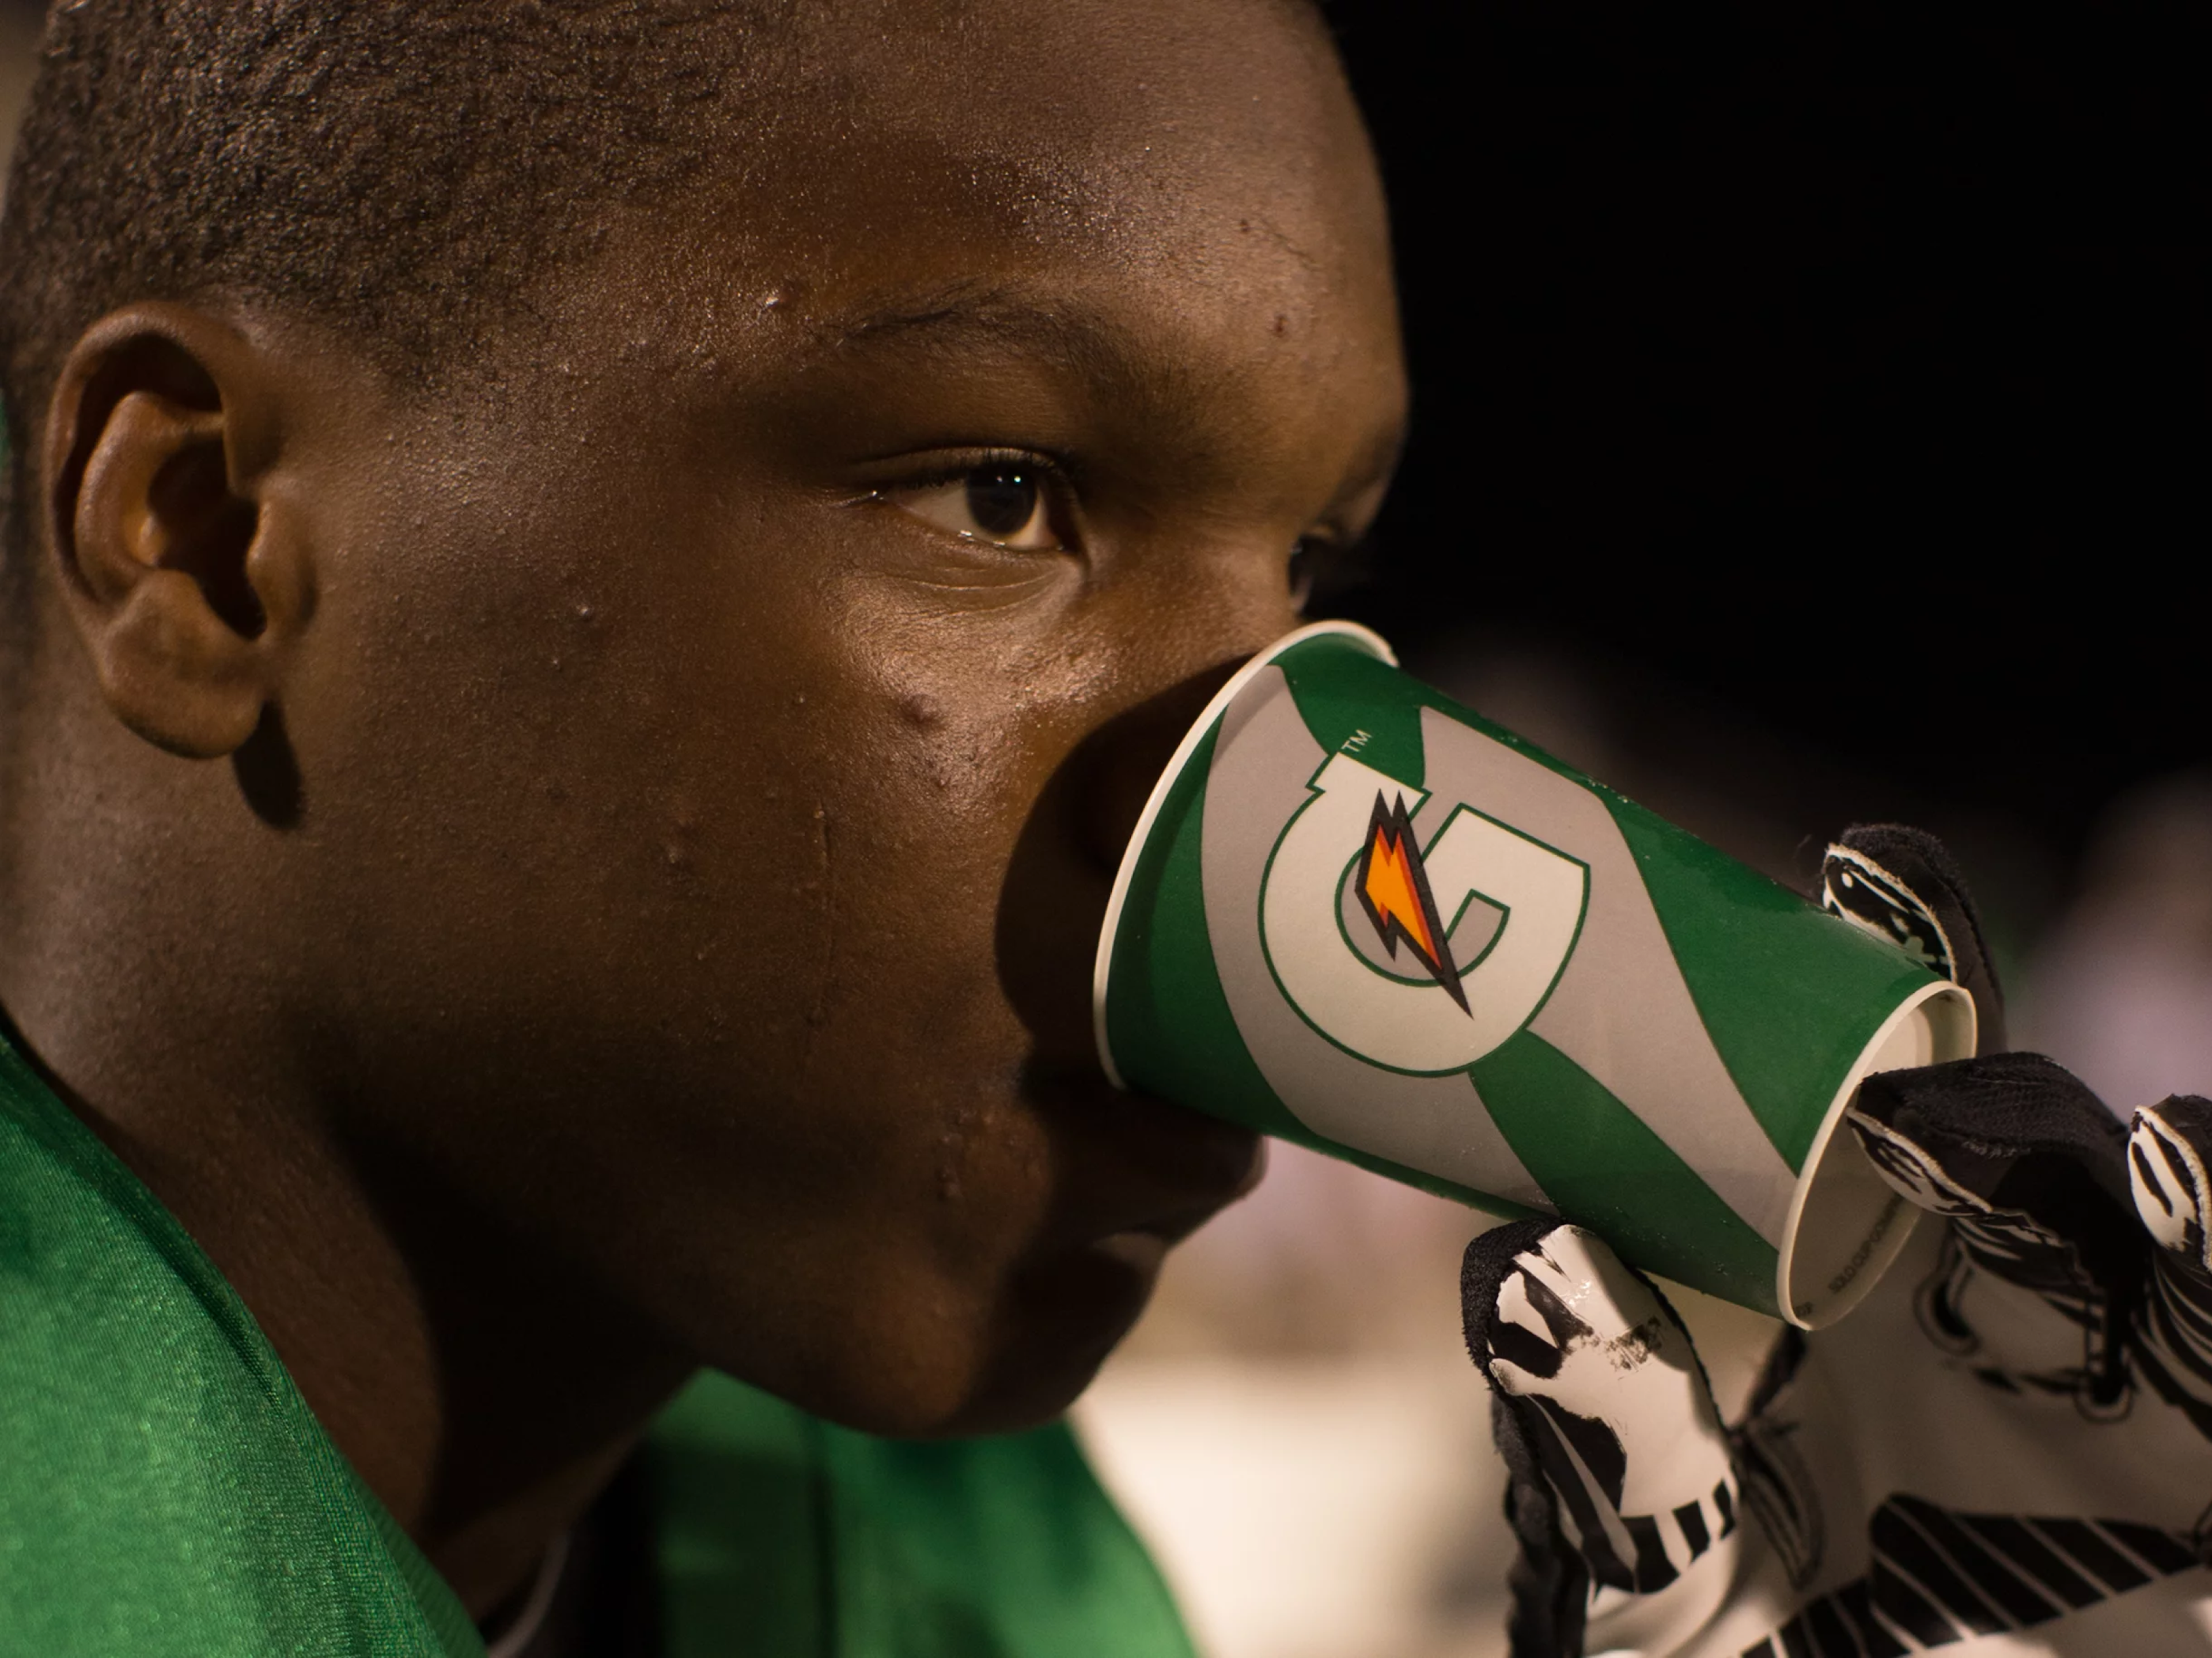 Athlete drinking from a green Gatorade cup